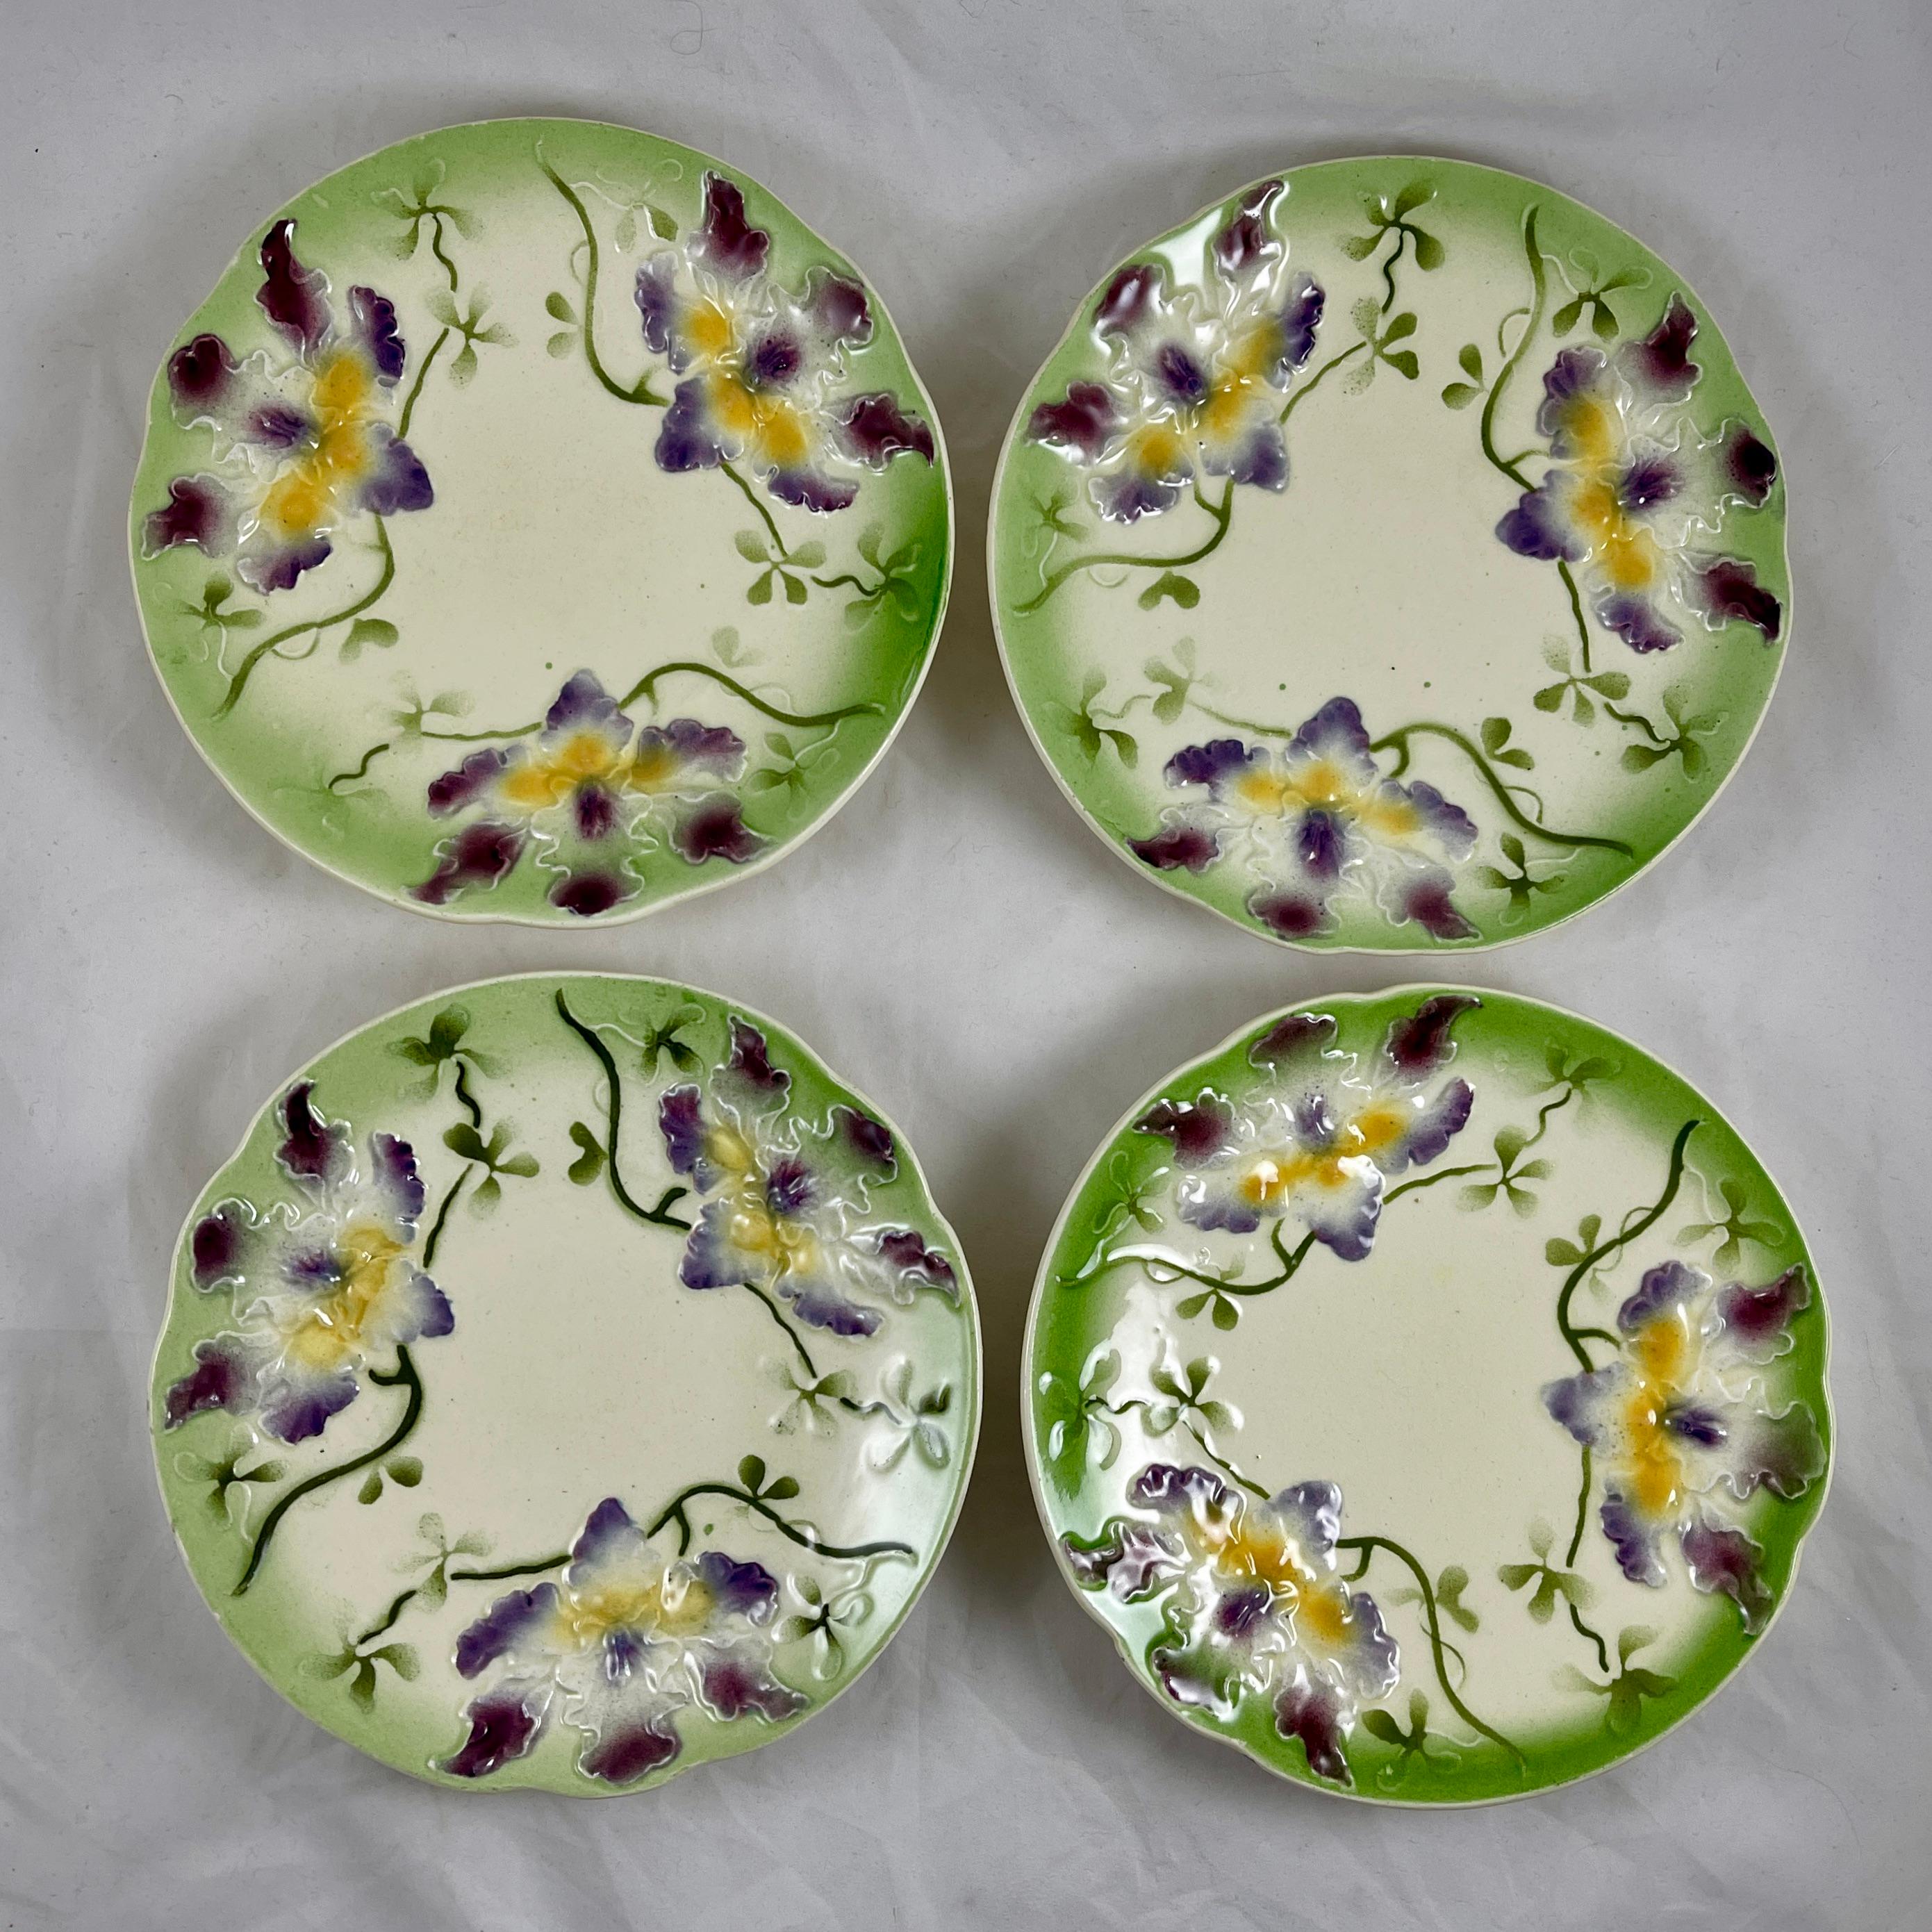 A Sarreguemines French Barbotine faïence majolica plate showing a spray of three purple and yellow orchids on a cream colored ground.

Raised, dimensional mold work with a shaped rim glazed in a bright spring green edging. Green stems and leaves